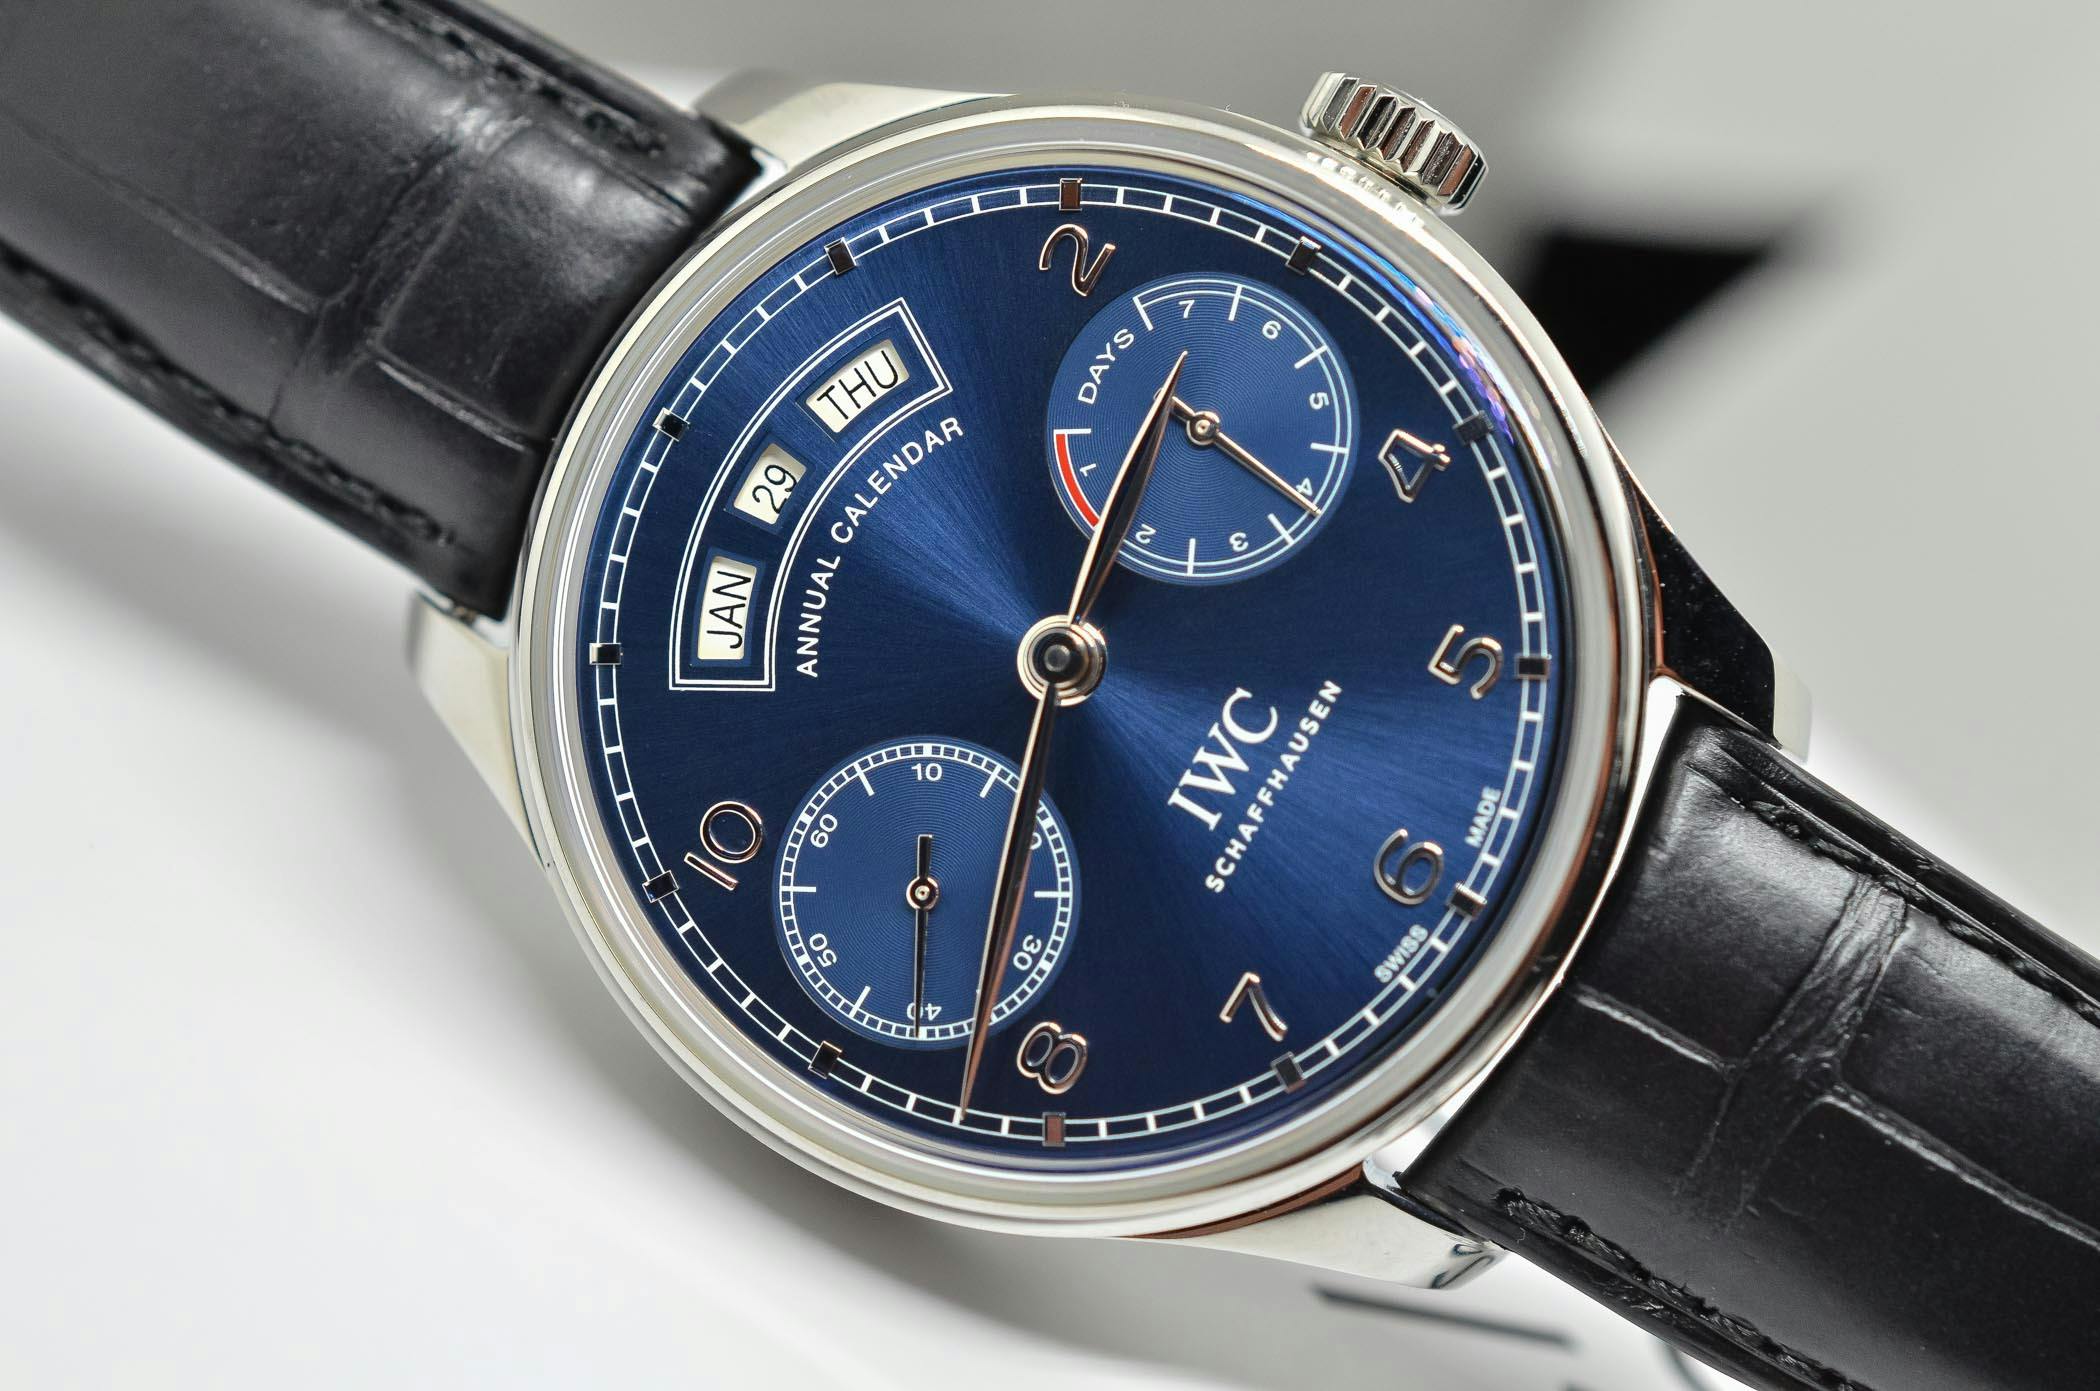 An IWC with a calendar complication that shows the Day, Date and Month, a very popular high-end calendar mechanism. 